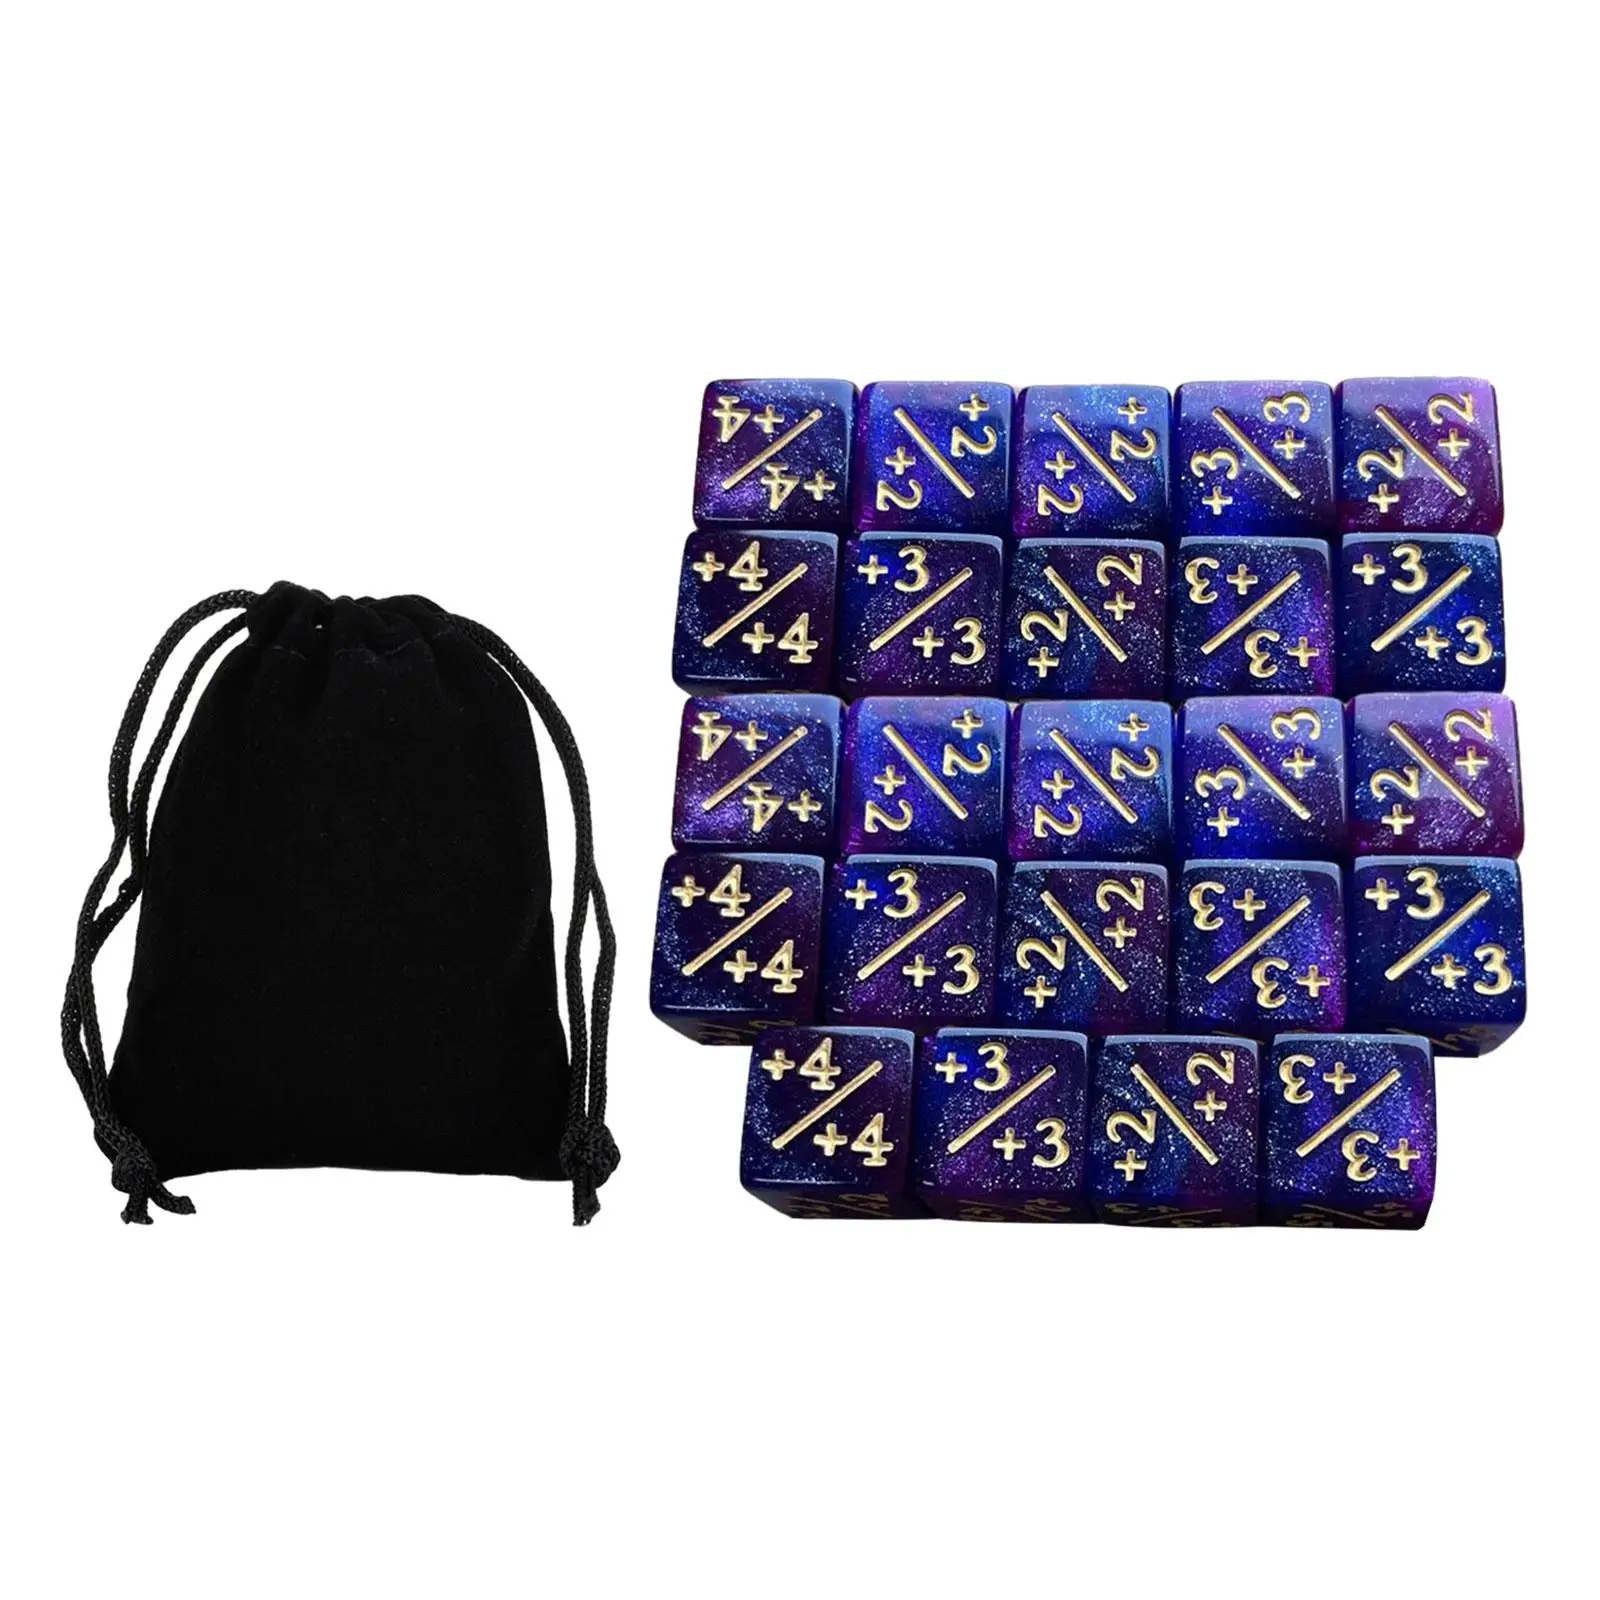 24 Pieces Dices Counter Token Dice Math Learning Game with Velvet Bag for Role Play Board Games Party Favors Preschool Math Game